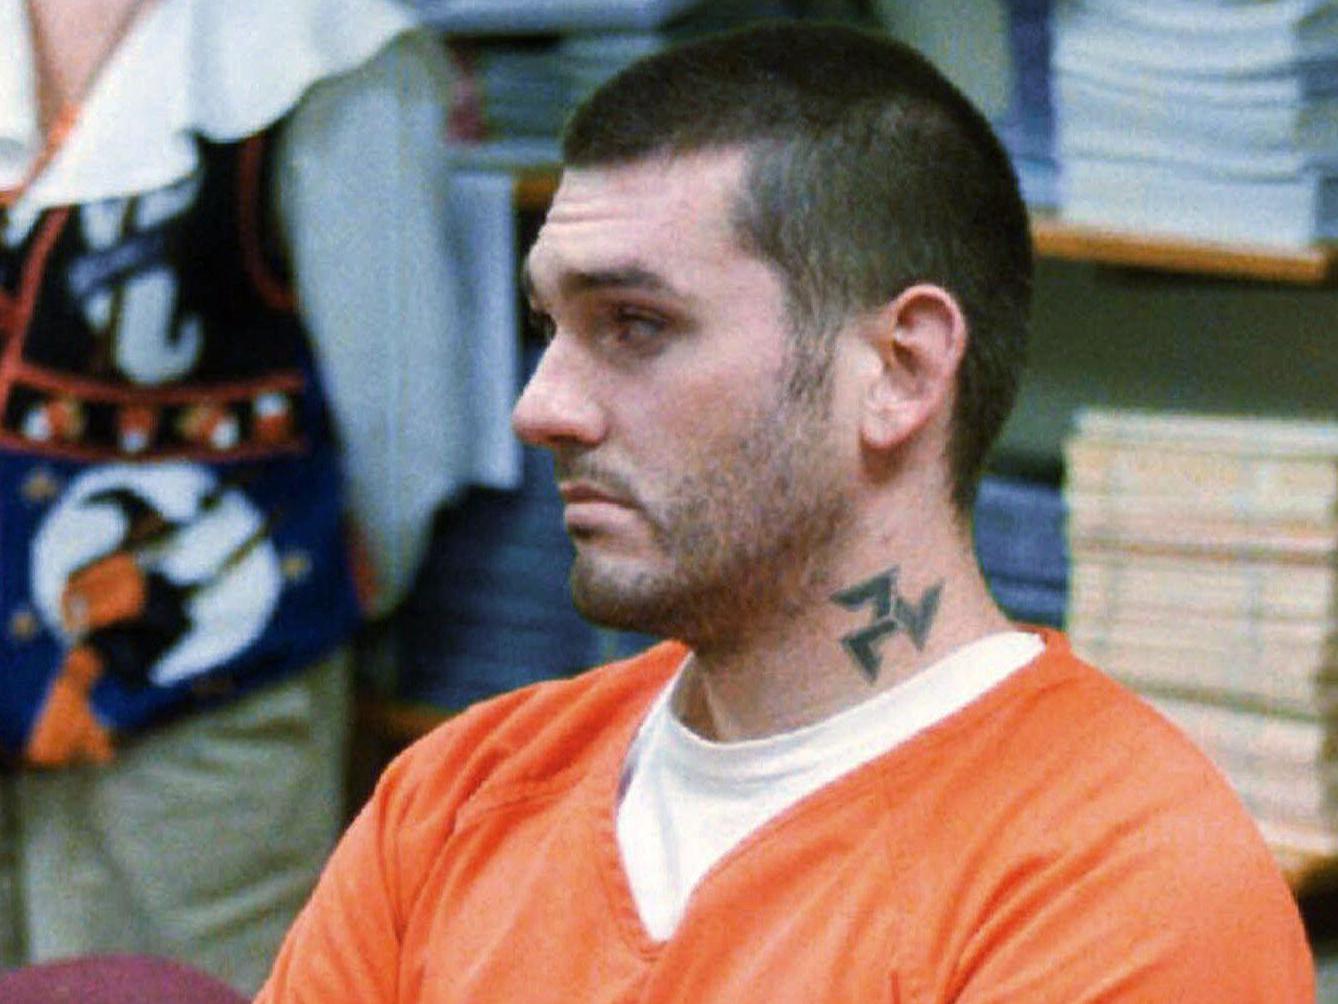 Daniel Lewis Lee is a former white supremacist and his execution was a PR stunt